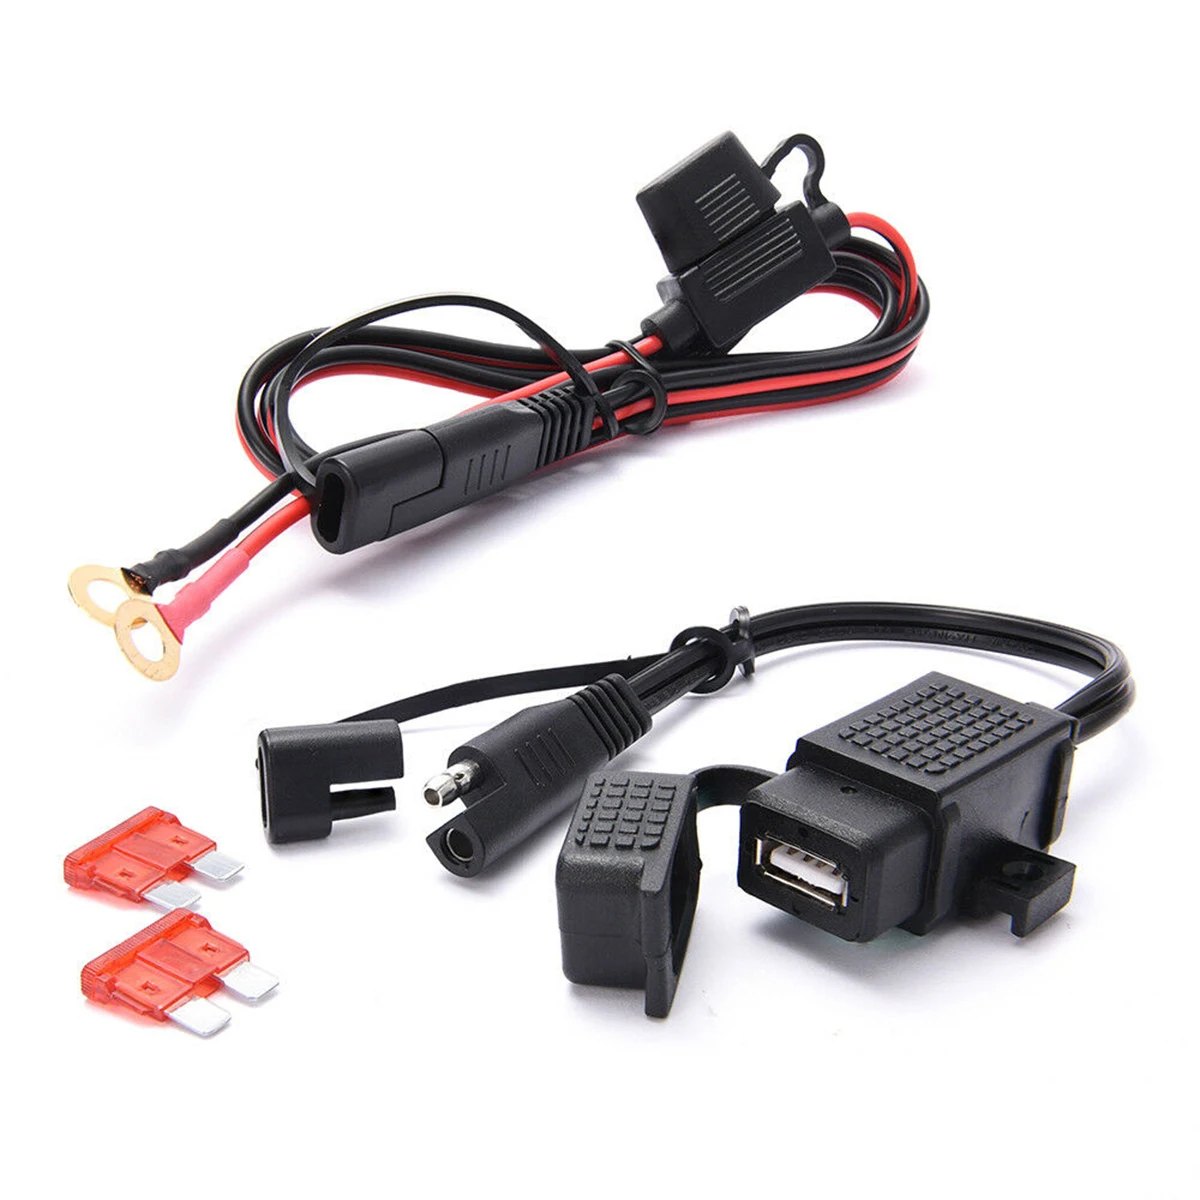 SAE to USB Cable Adapter Motorcycle Waterproof Adapters USB Charger Accessories